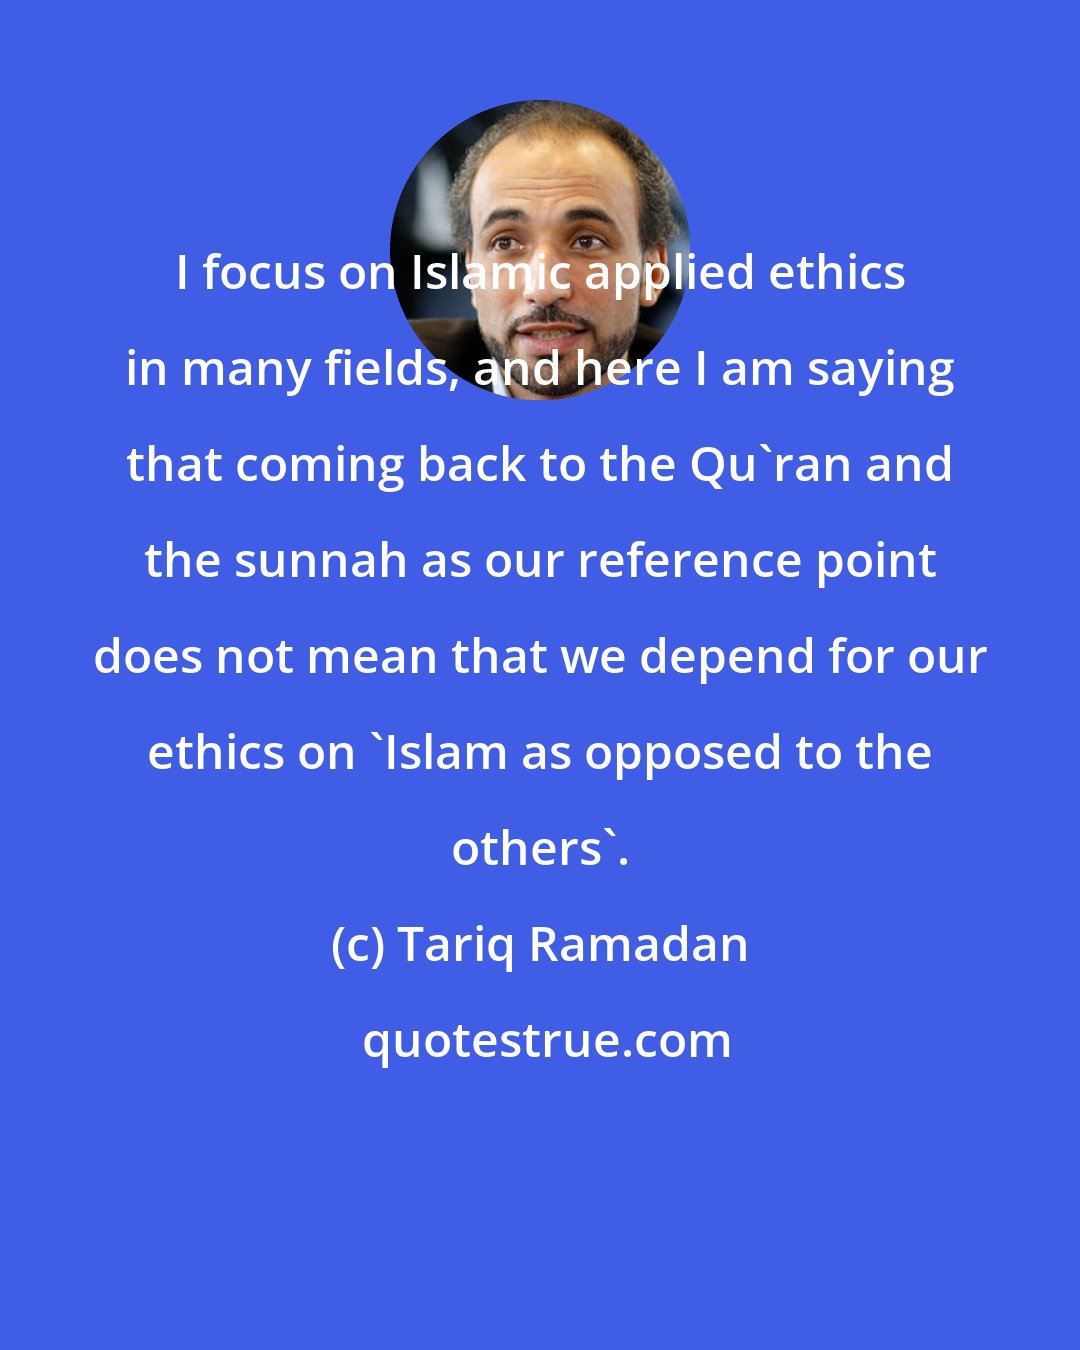 Tariq Ramadan: I focus on Islamic applied ethics in many fields, and here I am saying that coming back to the Qu'ran and the sunnah as our reference point does not mean that we depend for our ethics on 'Islam as opposed to the others'.